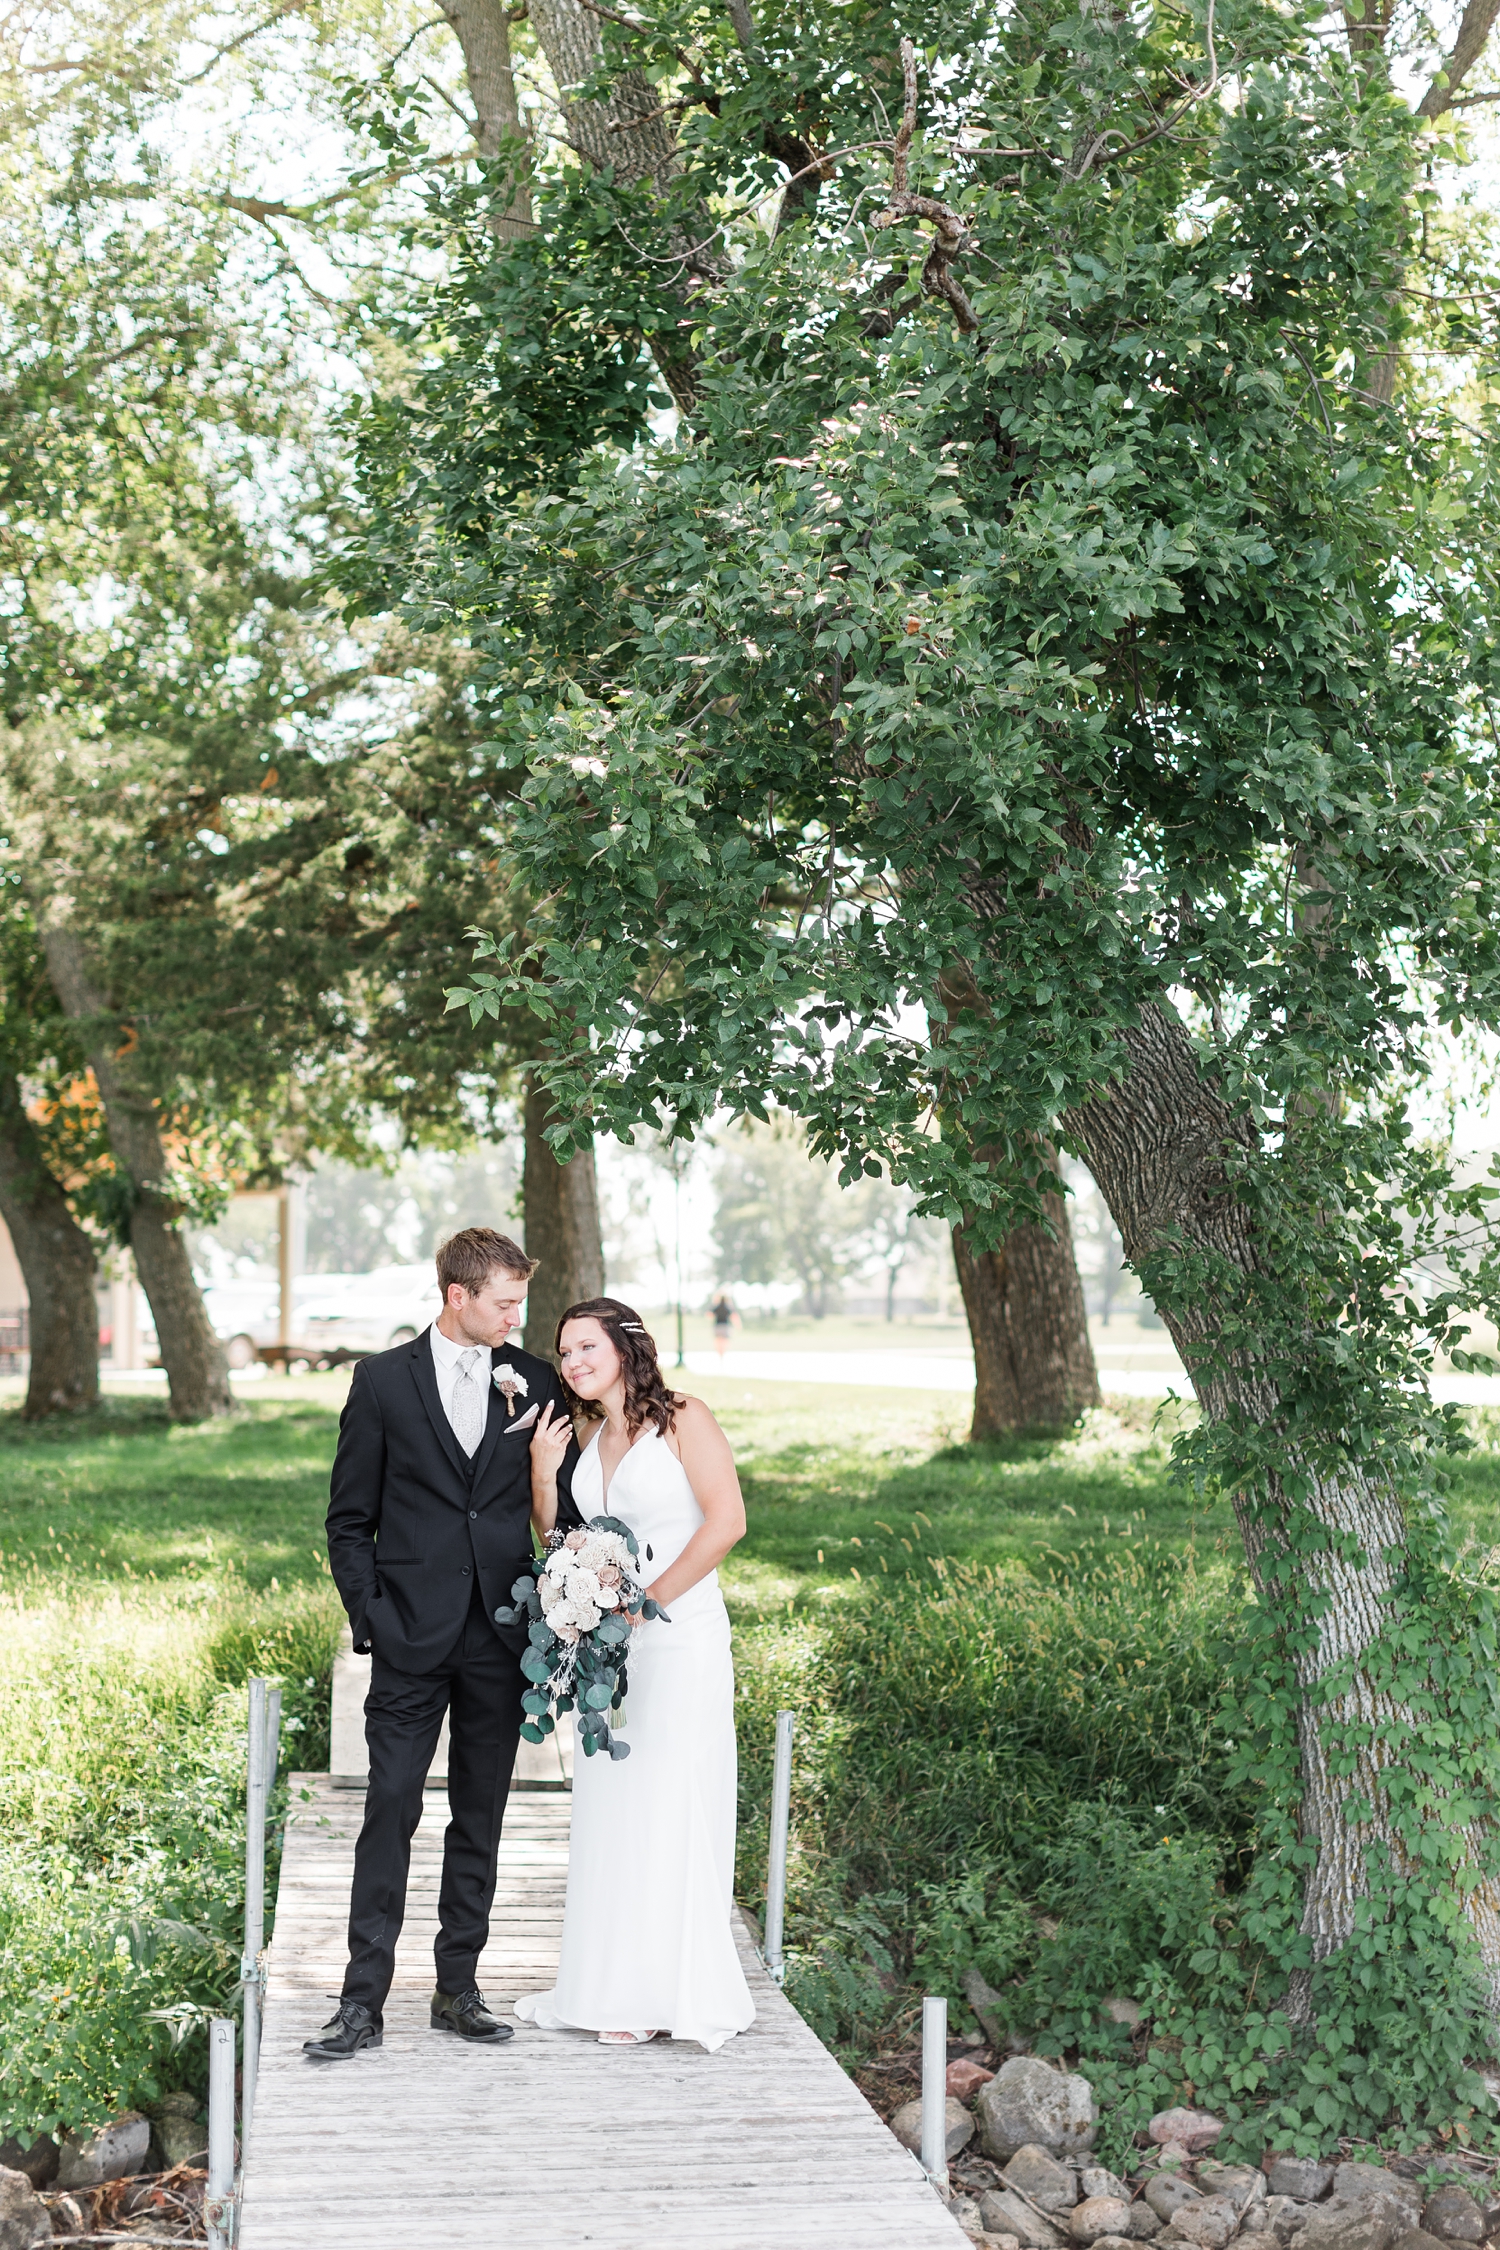 Grant and Alyssa stand together on a lake dock at 5 Island Campground in Emmetsburg, IA | CB Studio